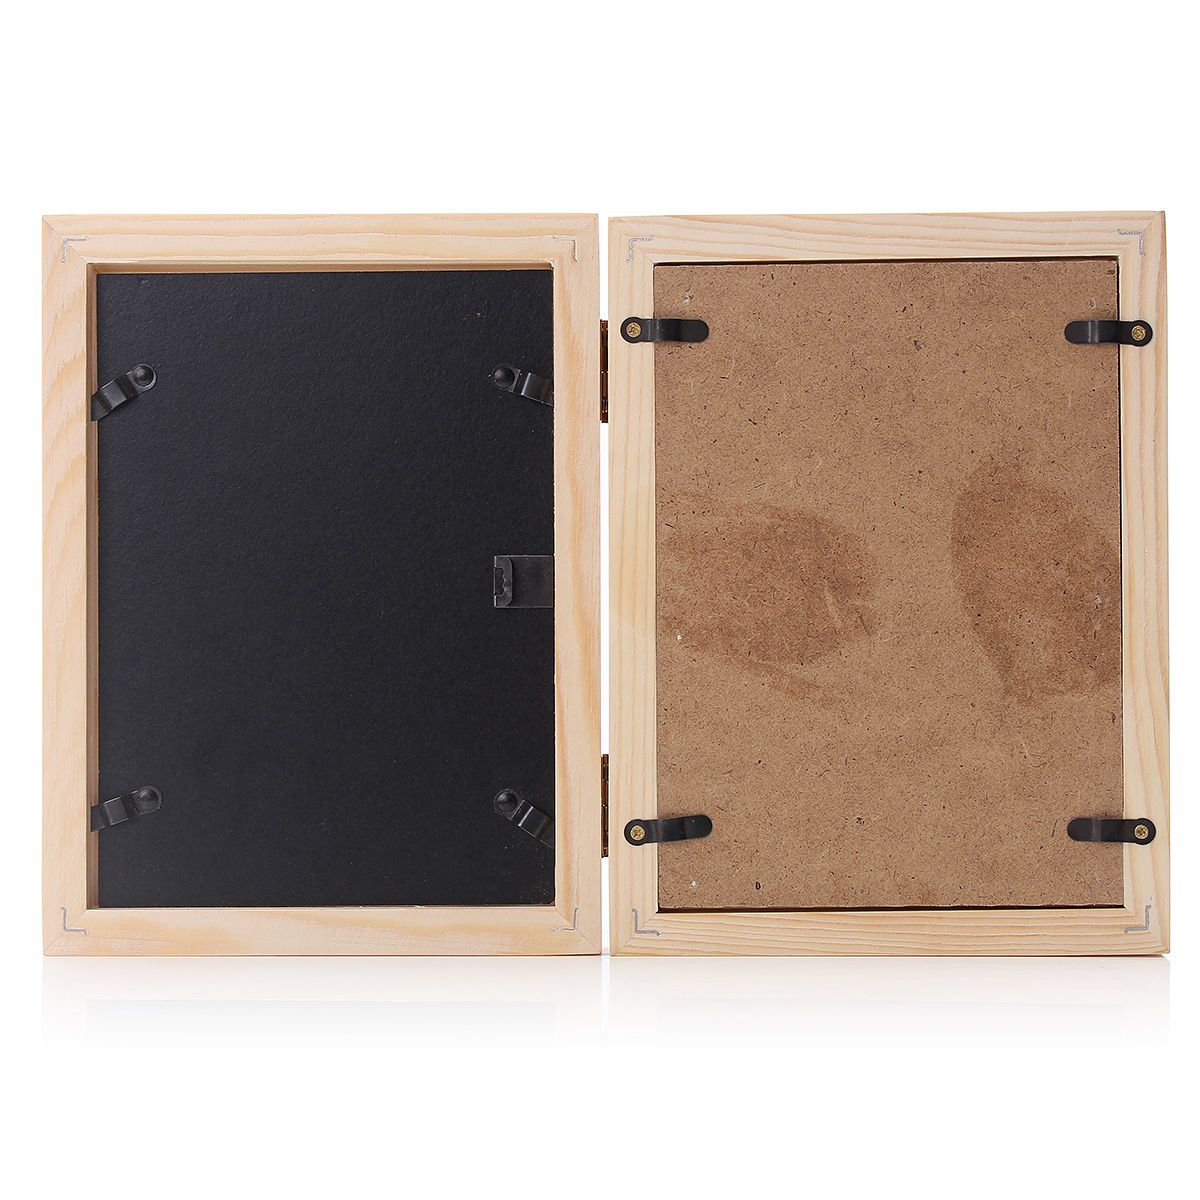 New-Born-Baby-Hand-Foot-Print-Soft-Clay-Photo-Frame-1632981